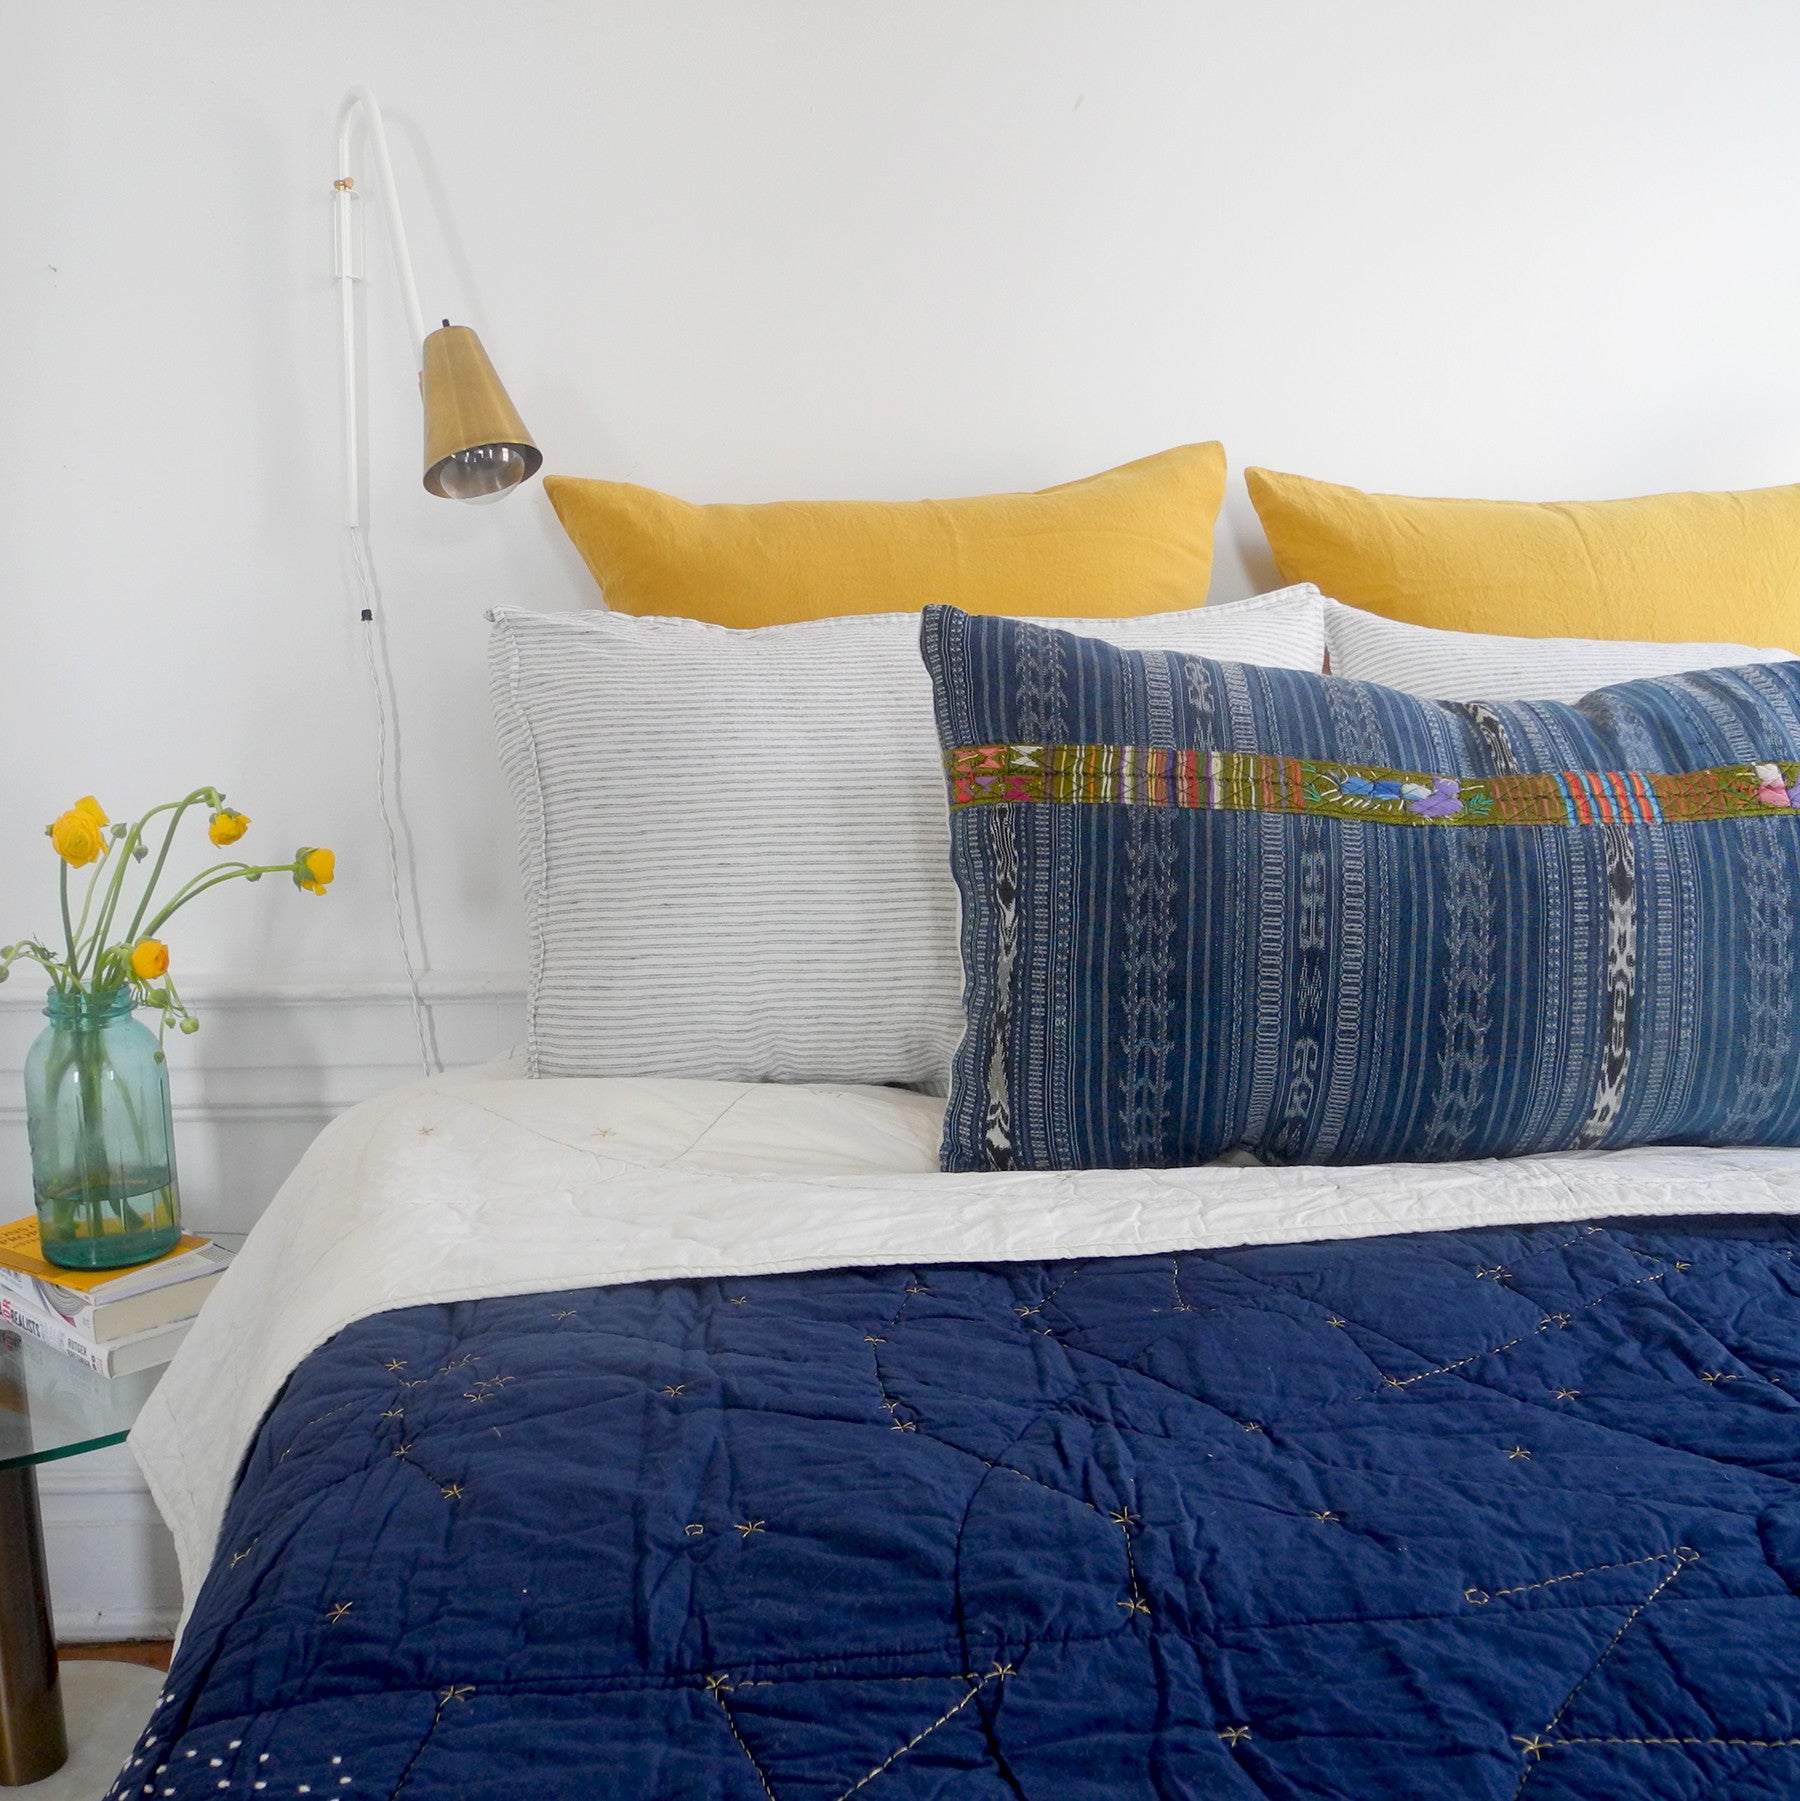 Linge Particulier Honey Yellow Euro Linen Pillowcase Sham with a Haptic Lab constellation quilt for a colorful linen bedding look in mustard yellow - Collyer&#39;s Mansion